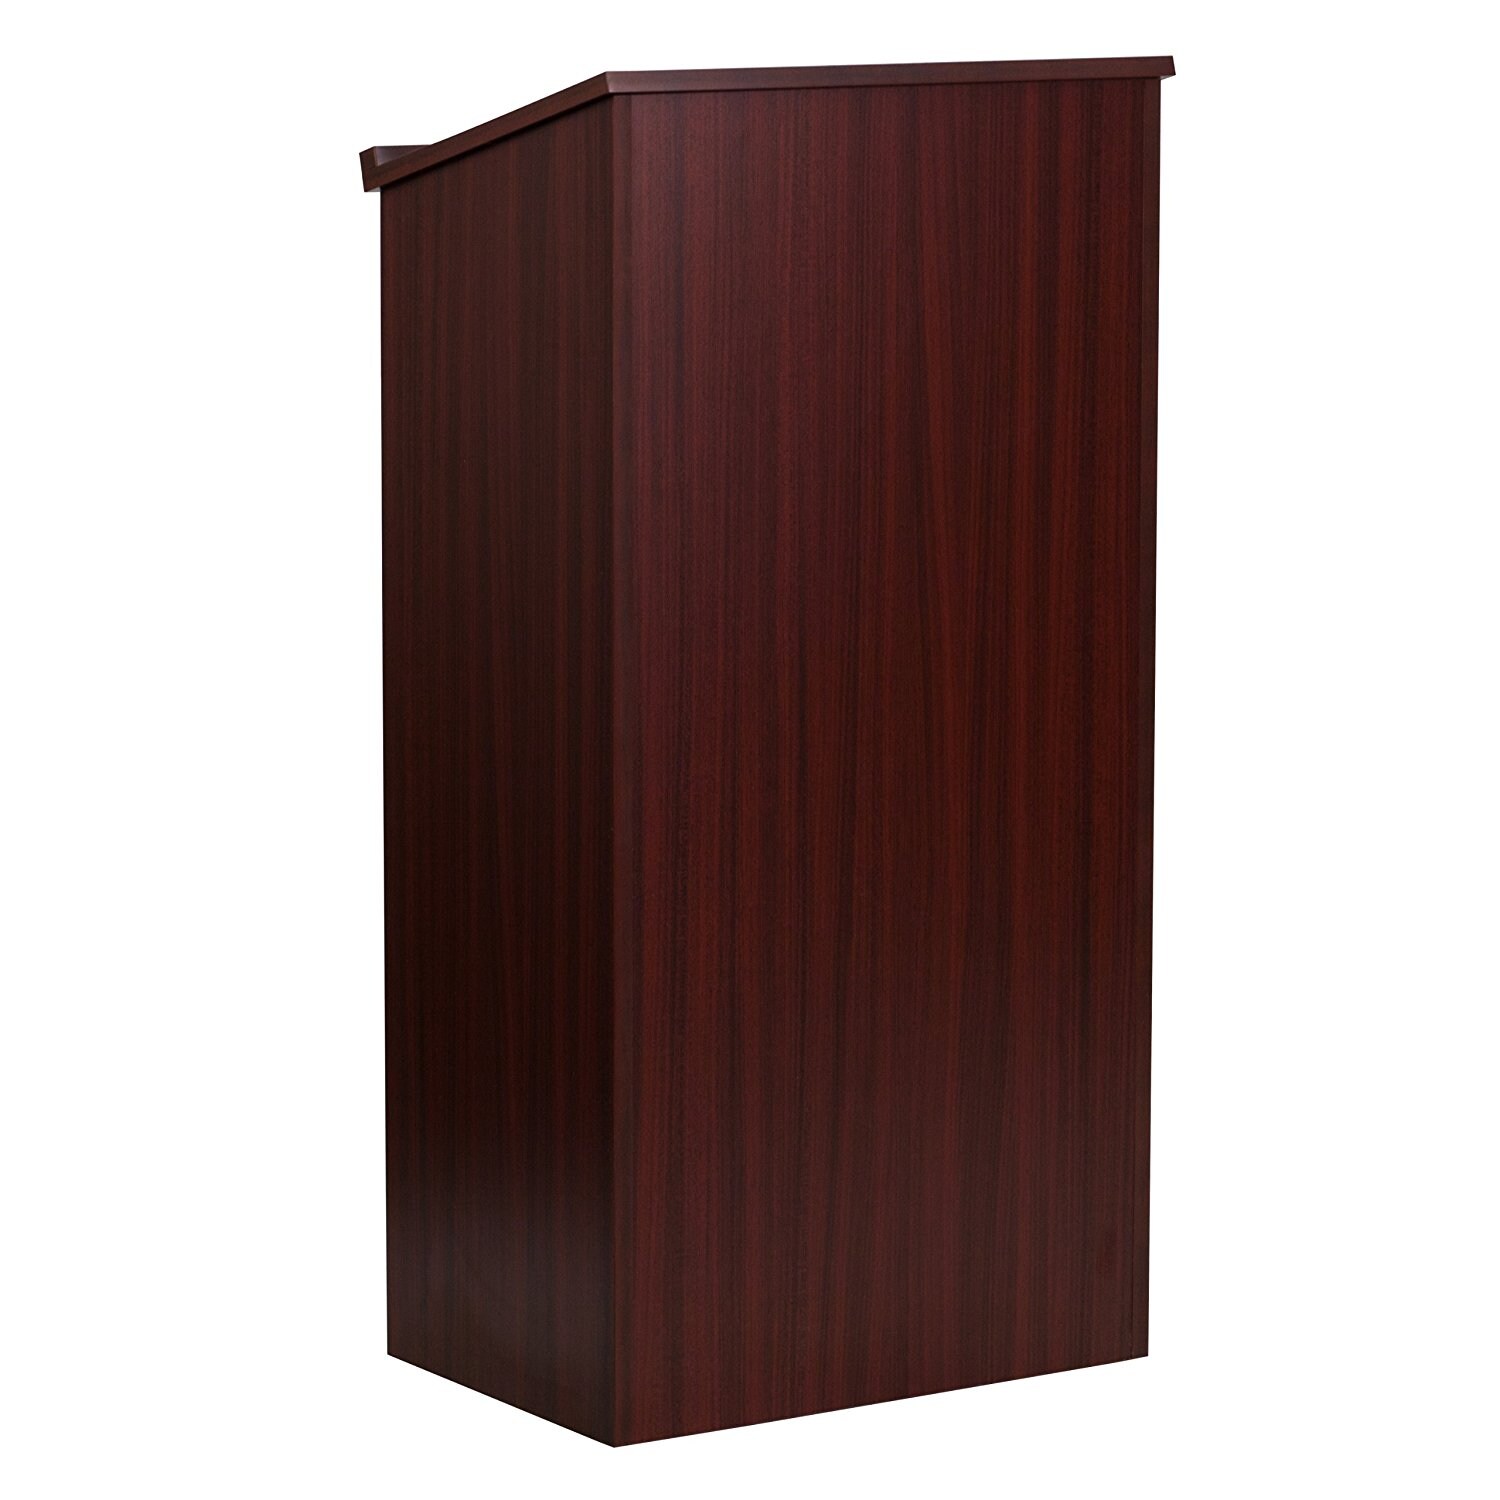 AdirOffice 661-01 Mahogany Stand up Podium with Adjustable Shelf for sale online 